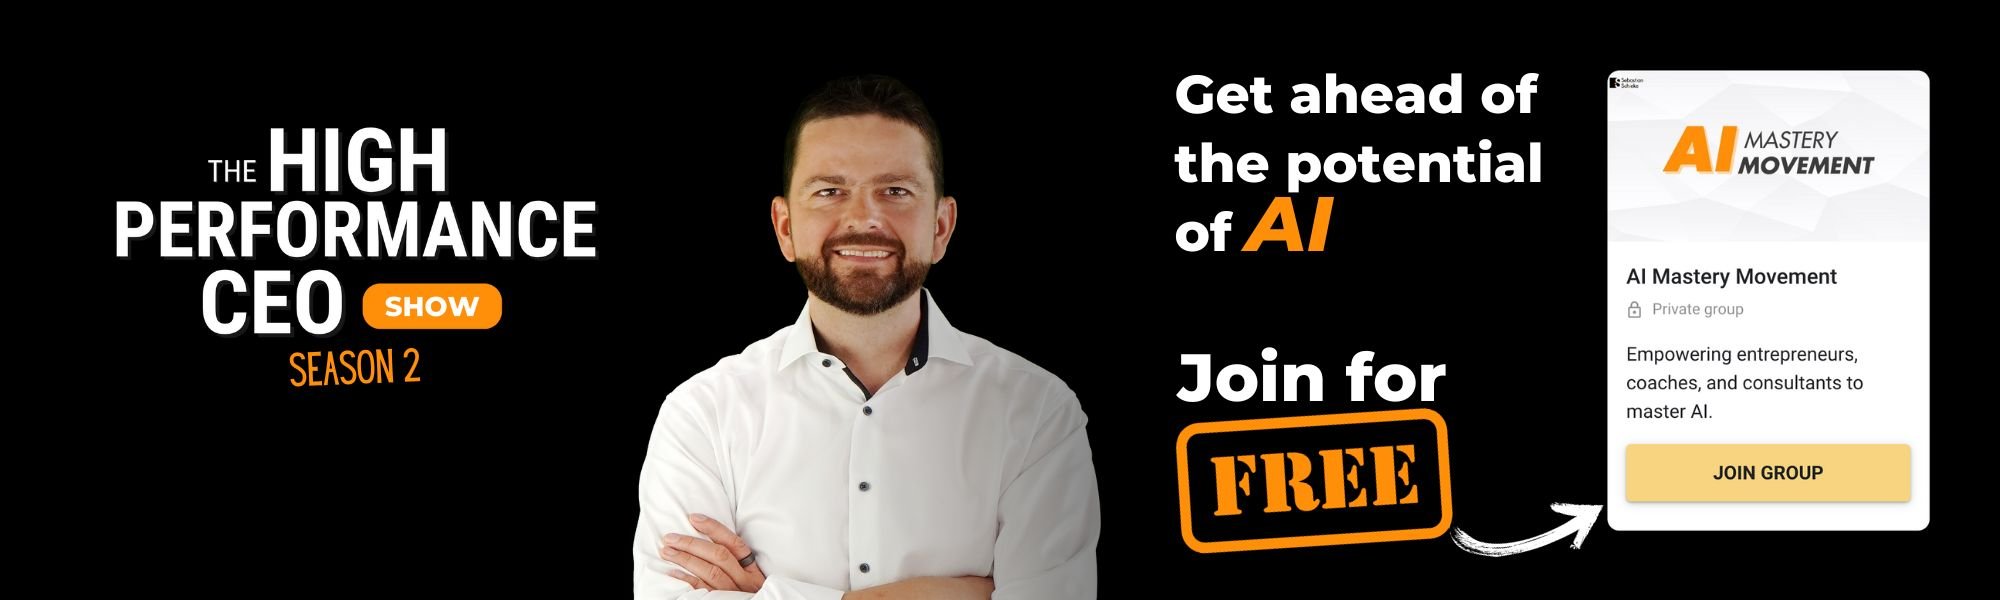 Join the AI Mastery Movement